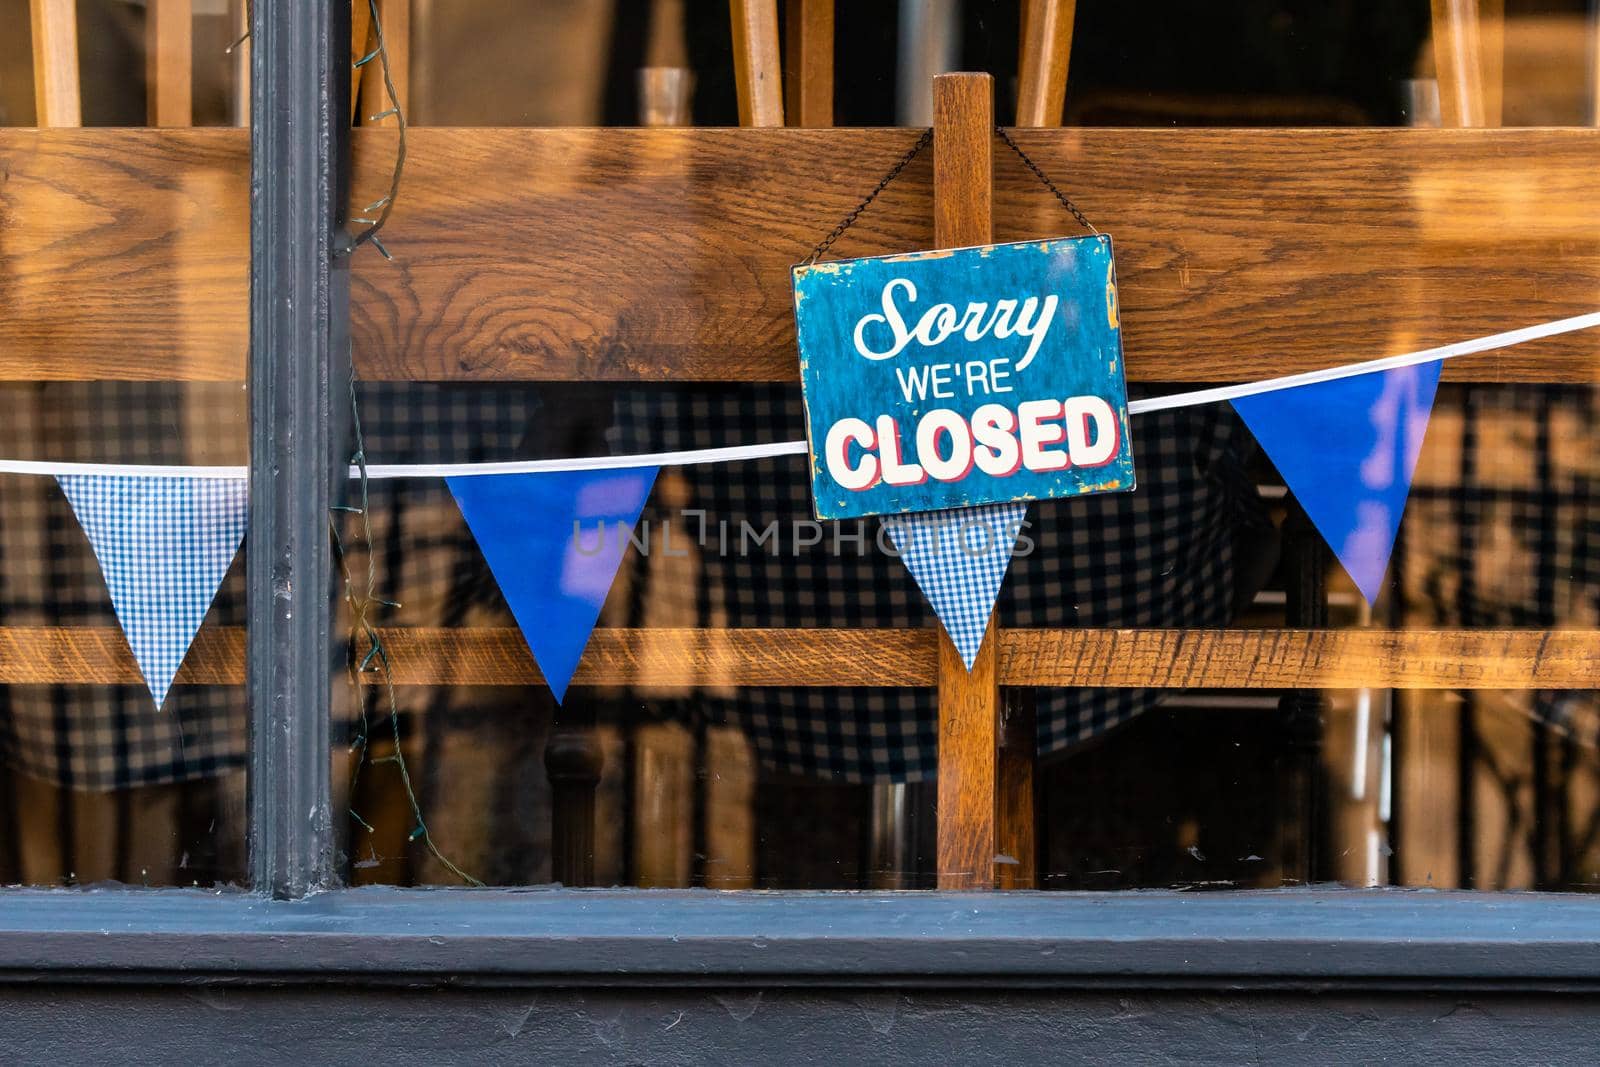 Sorry we are closed sign outside a restaurant during lockdown caused by covid-19 pandemic, Cambridge, UK